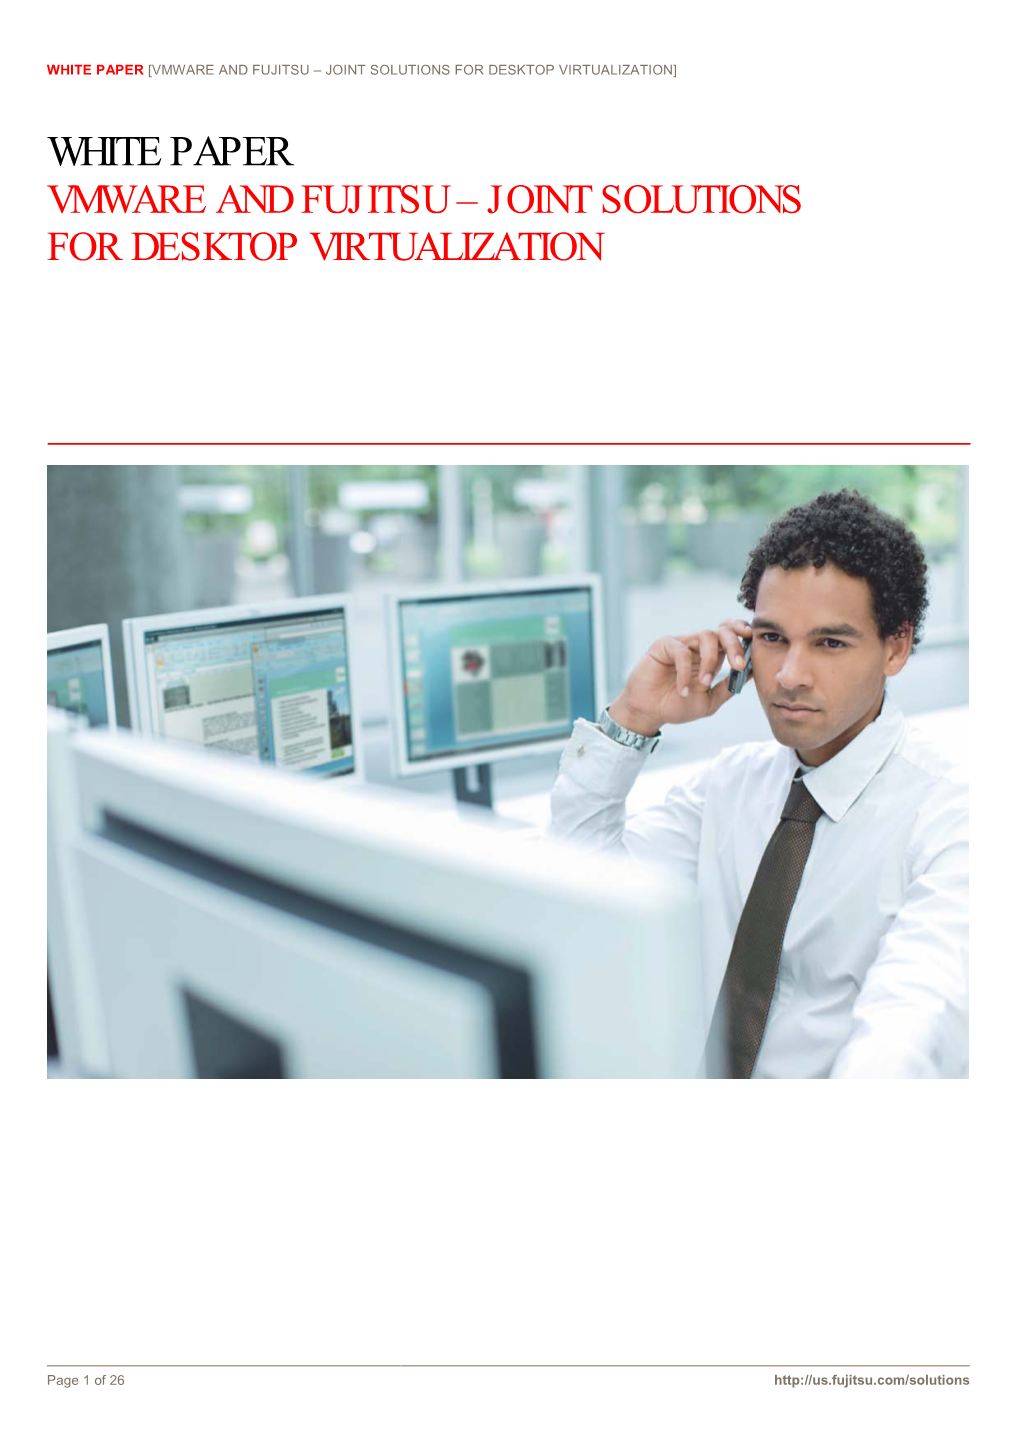 Vmware and Fujitsu: Joint Solutions for Desktop Virtualization White Paper